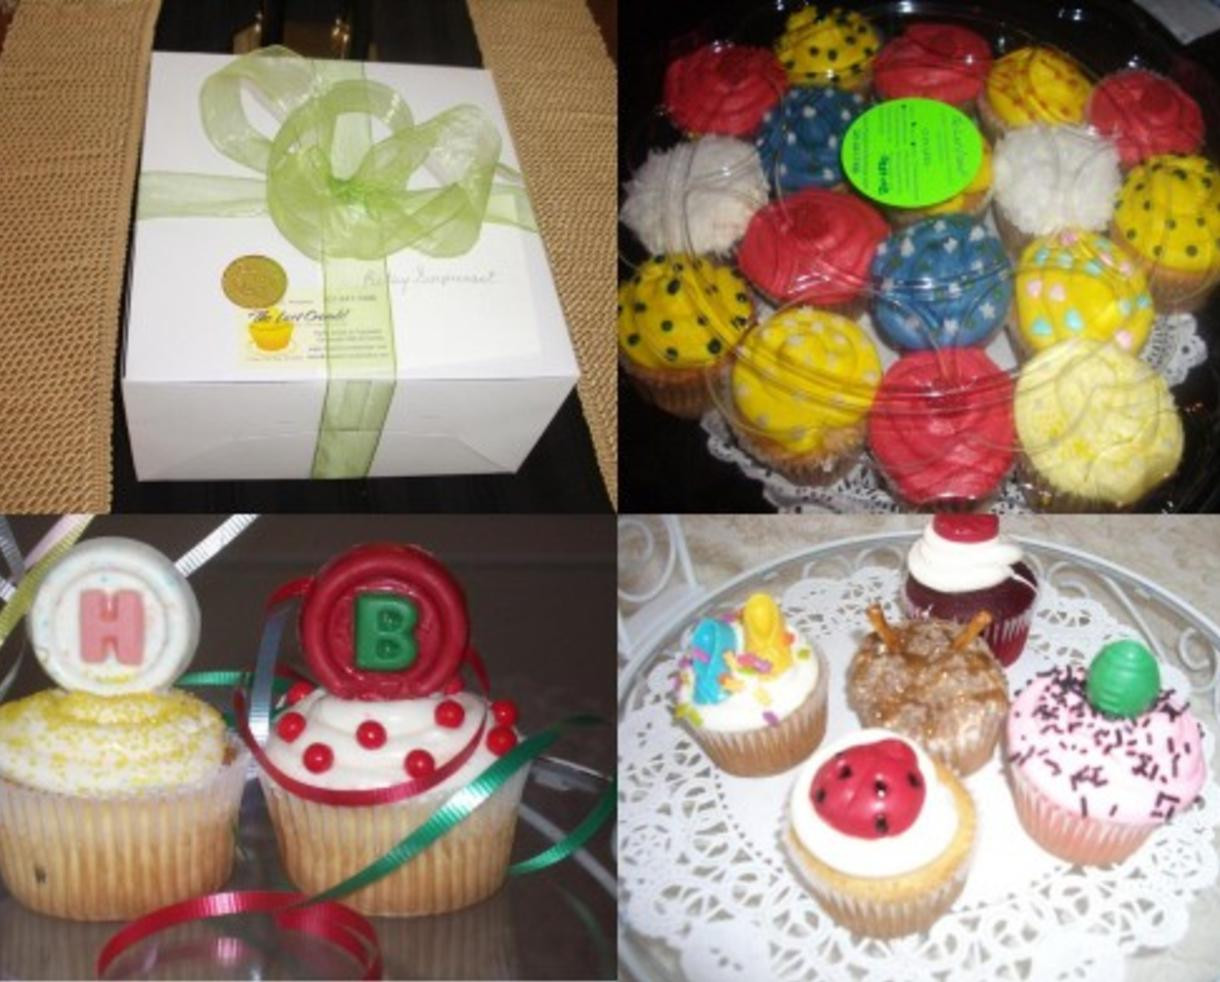 Gourmet Cupcakes Delivered
 Deal 3 Dozen Gourmet Cupcakes for $30 off $60